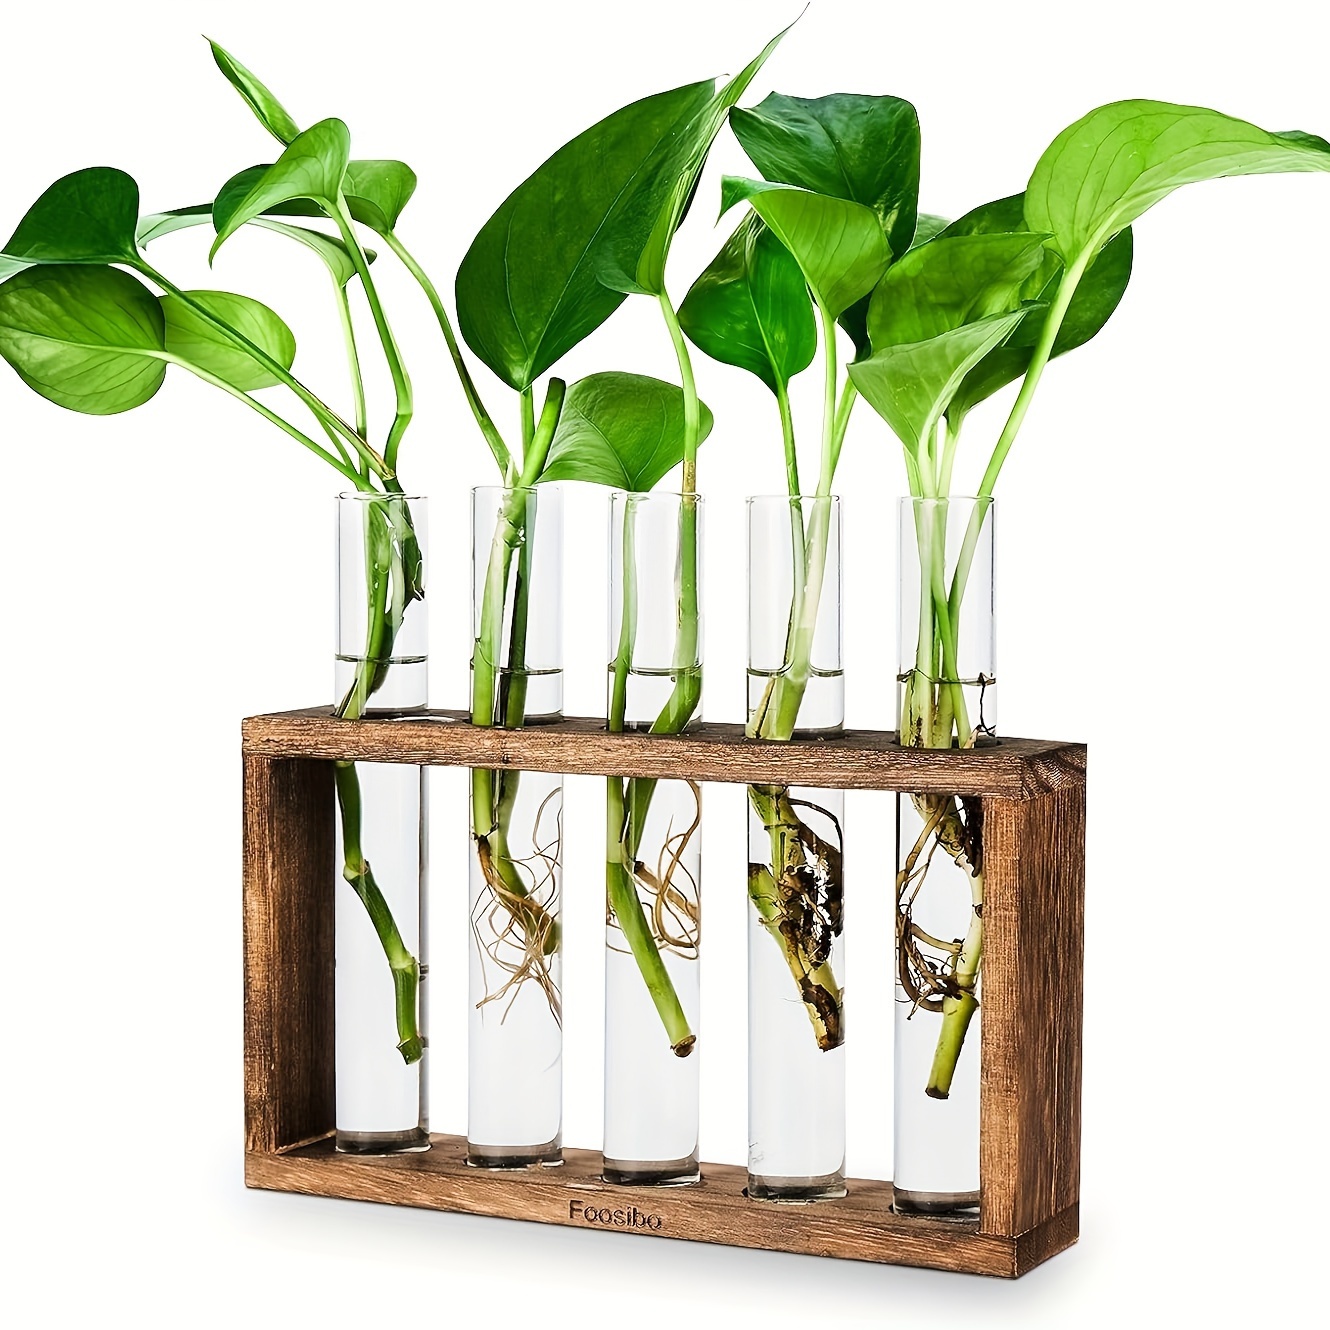 

Plant Glass Container With Wooden Stand, Wall Hanging Glass Vase With 5 Test Tubes, Desktop Glass Container For Hydroponic Plant Cultivation, Unique Gift For Girls